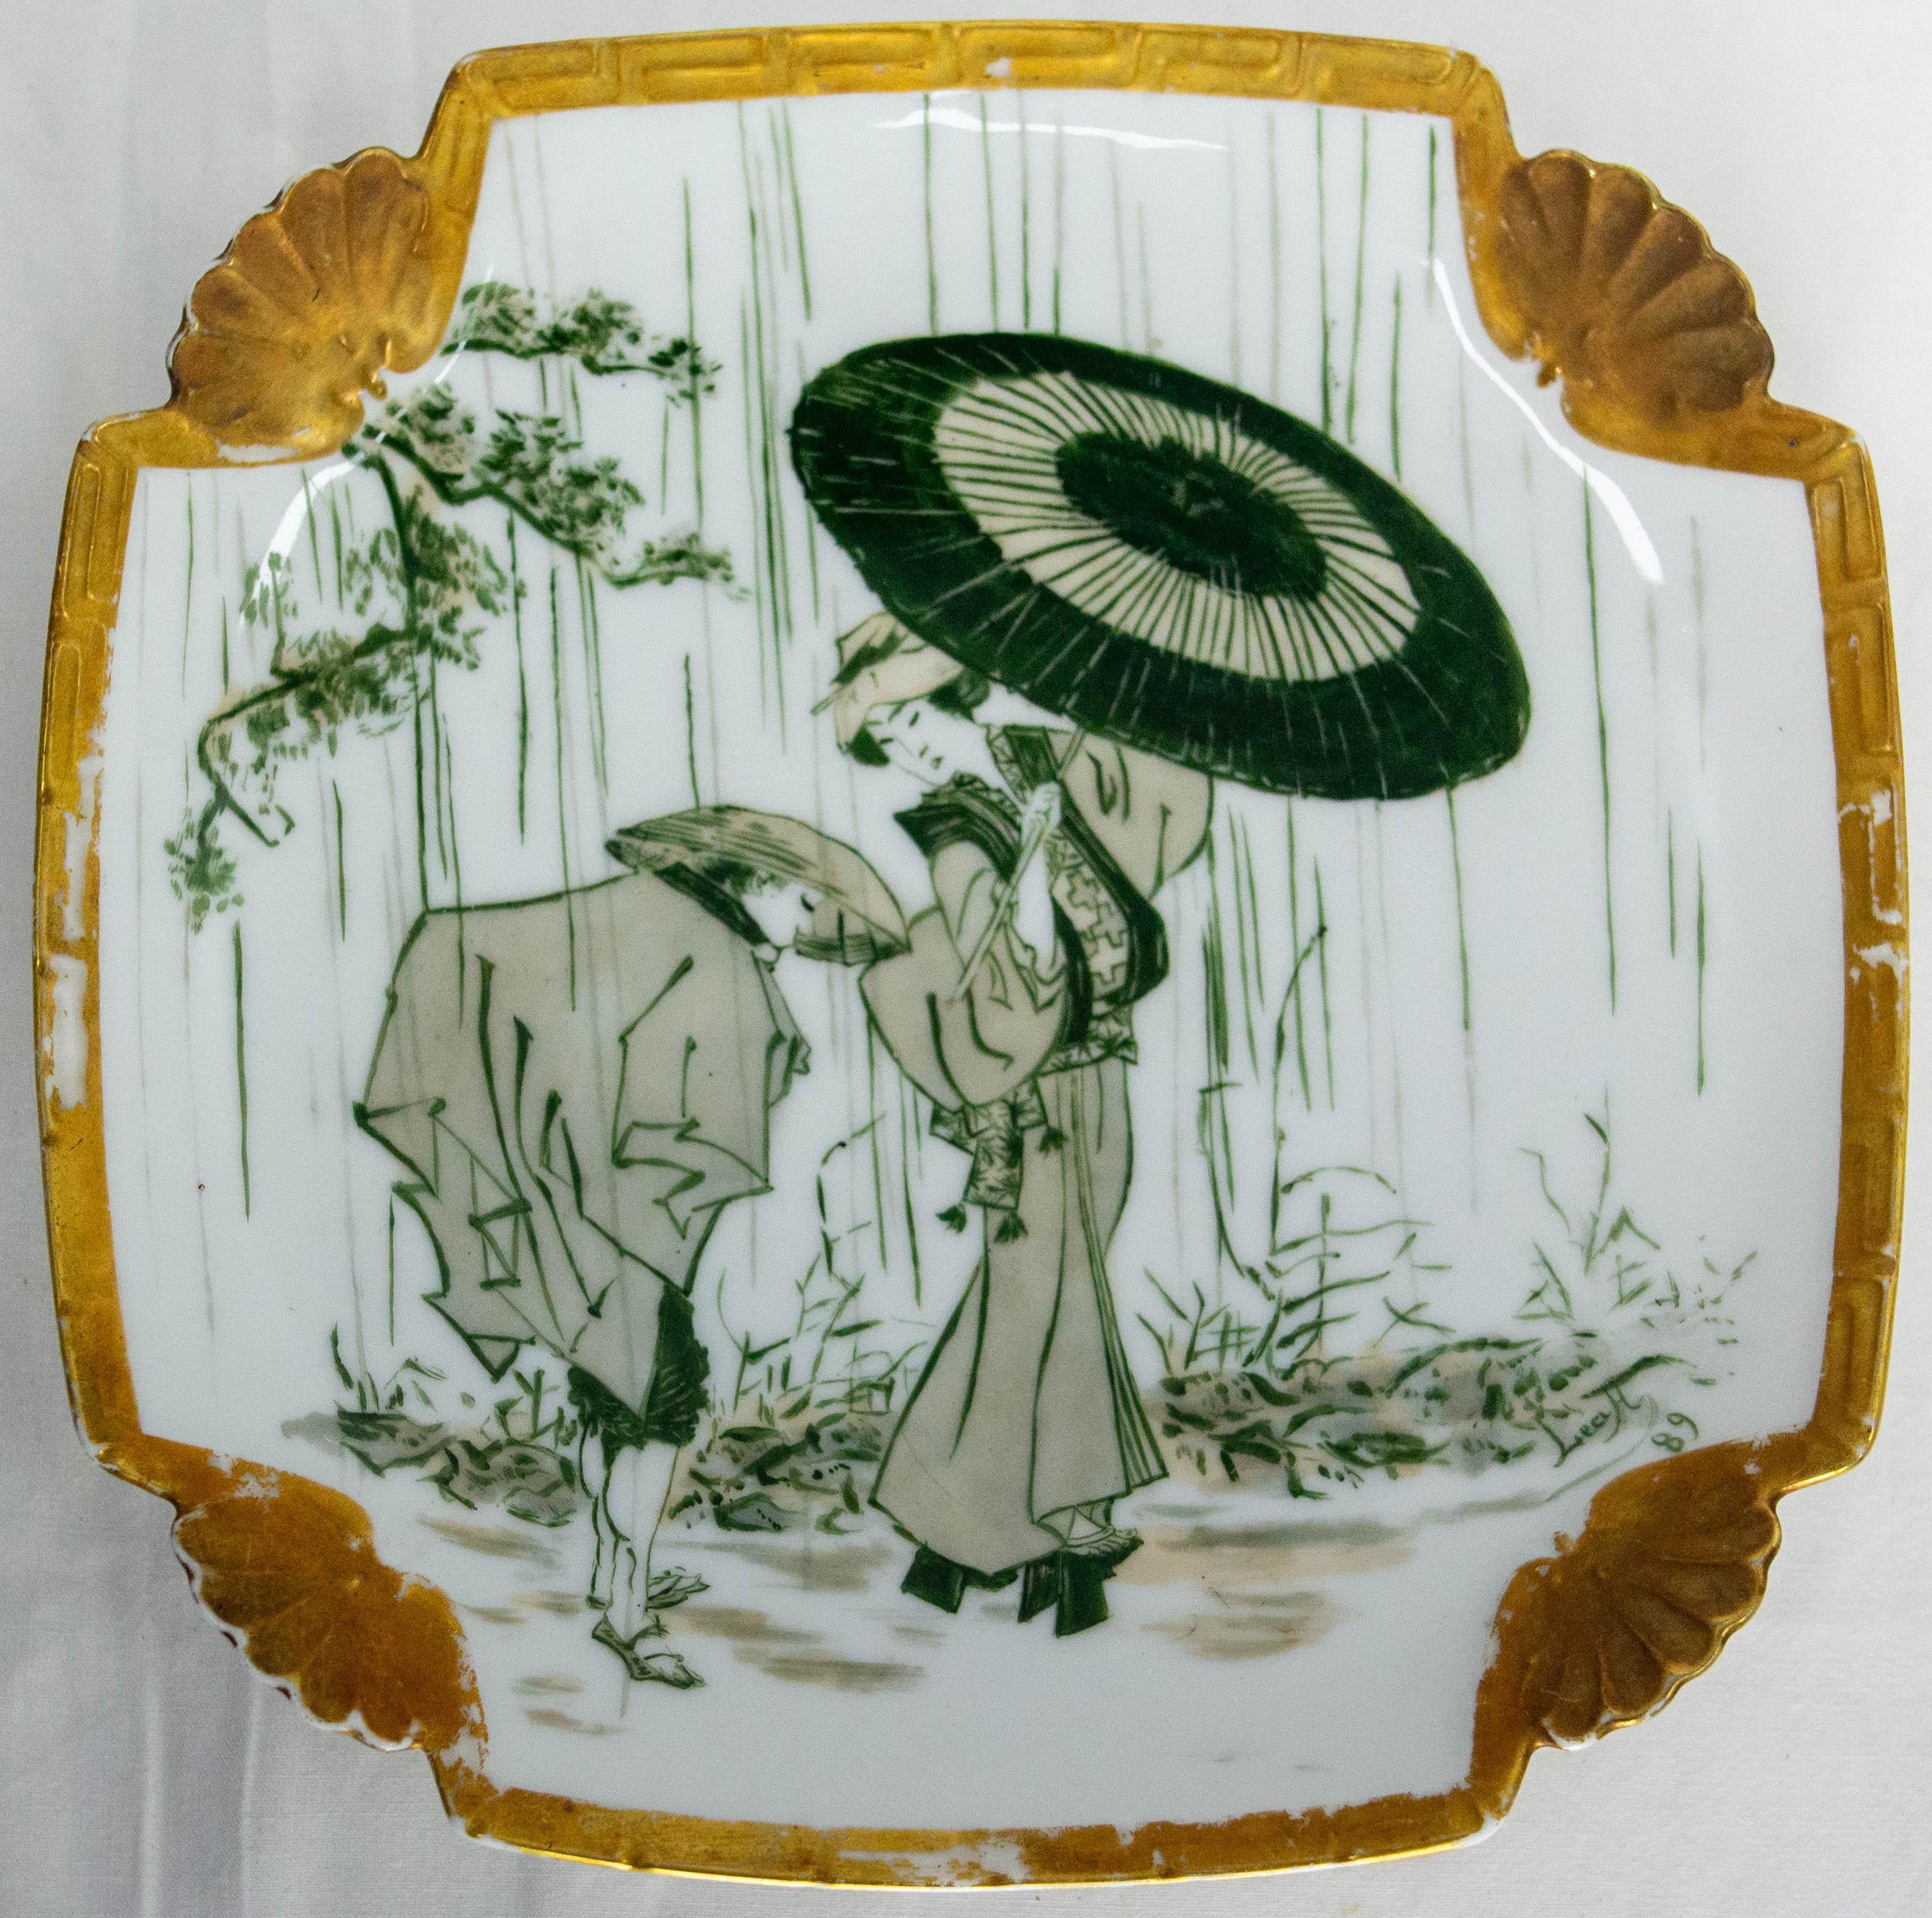 Plate square-shaped in the Japanese style typical of 19th-century Europe's infatuation with Eastern cultures.
Ceramic decorated with a geisha carrying an umbrella under the rain and with flowering cherry branches.
Made circa n the 19th